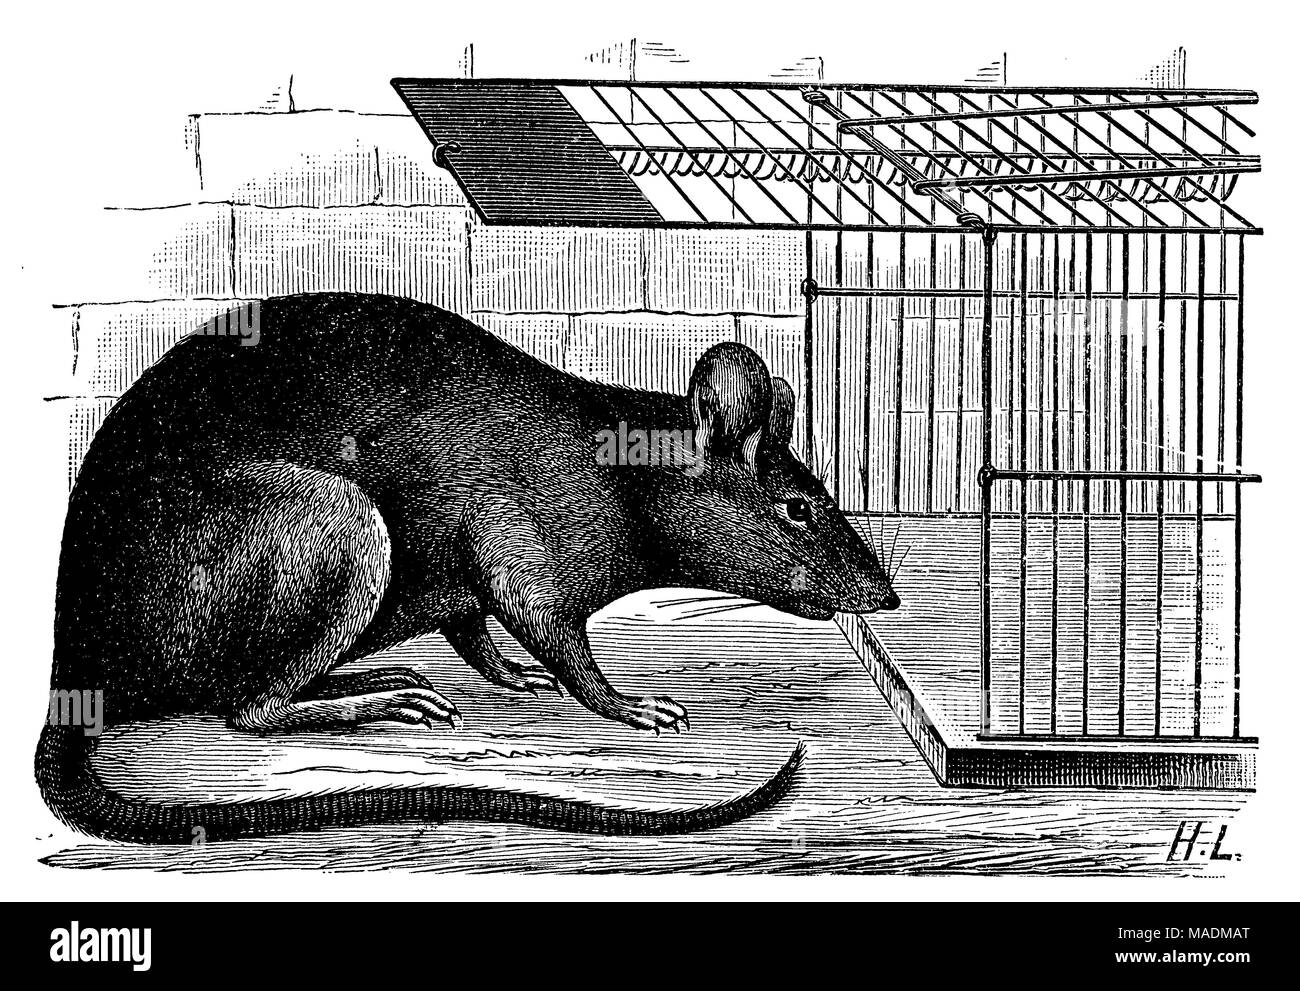 Rat trap Black and White Stock Photos & Images - Alamy